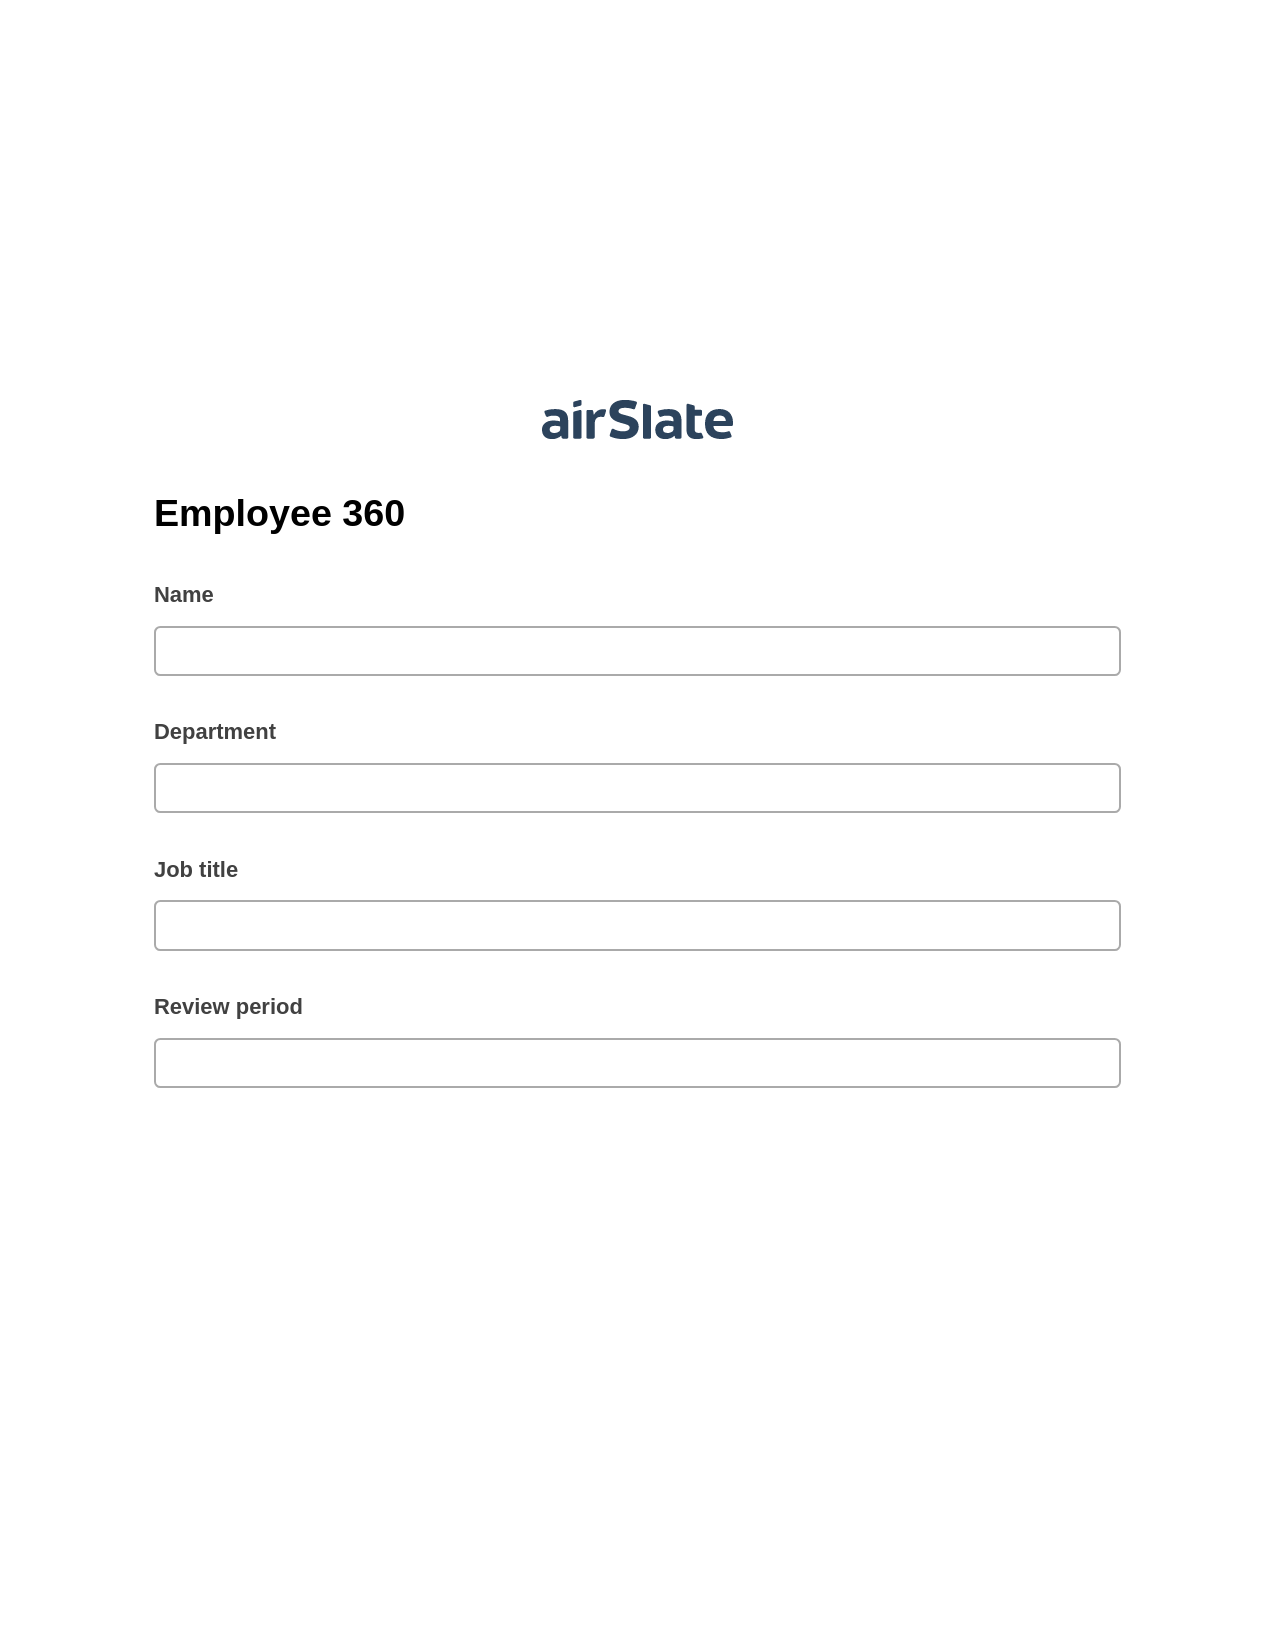 Employee 360 Pre-fill from Excel Spreadsheet Bot, Update Salesforce Records Bot, Archive to OneDrive Bot